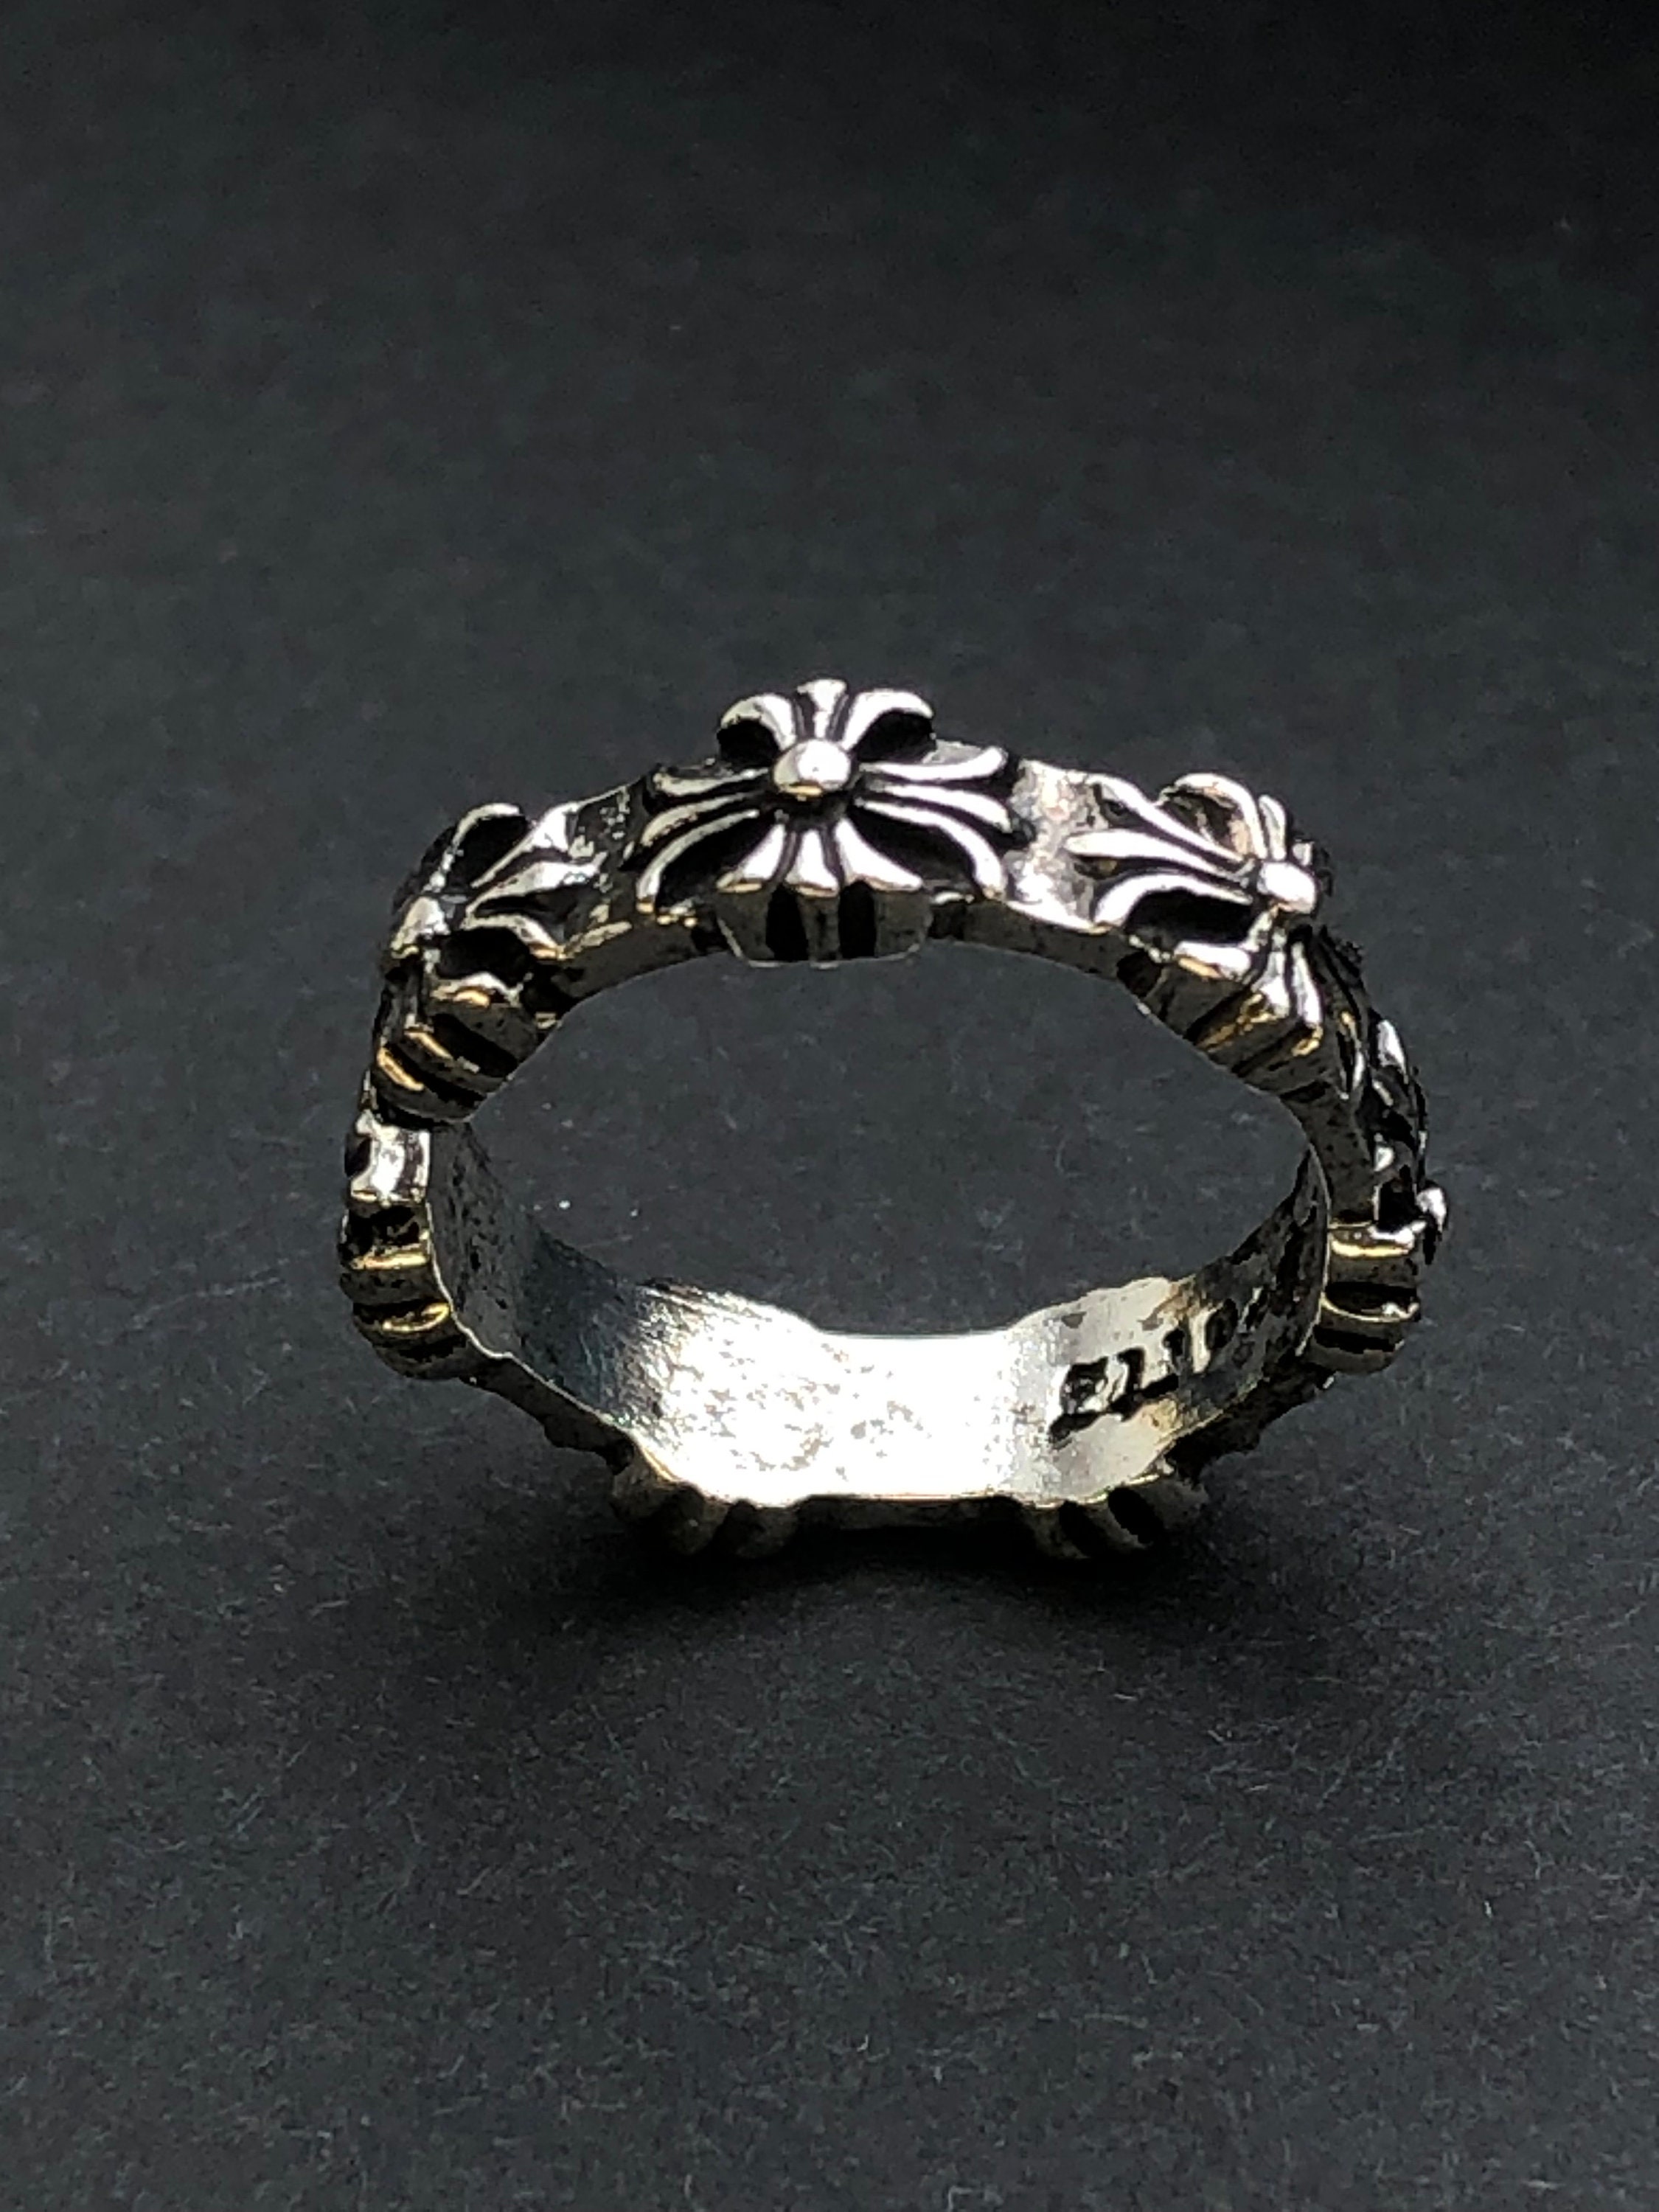 Chrome Hearts ring form Jewelry Jack for my bf : r/QualityReps